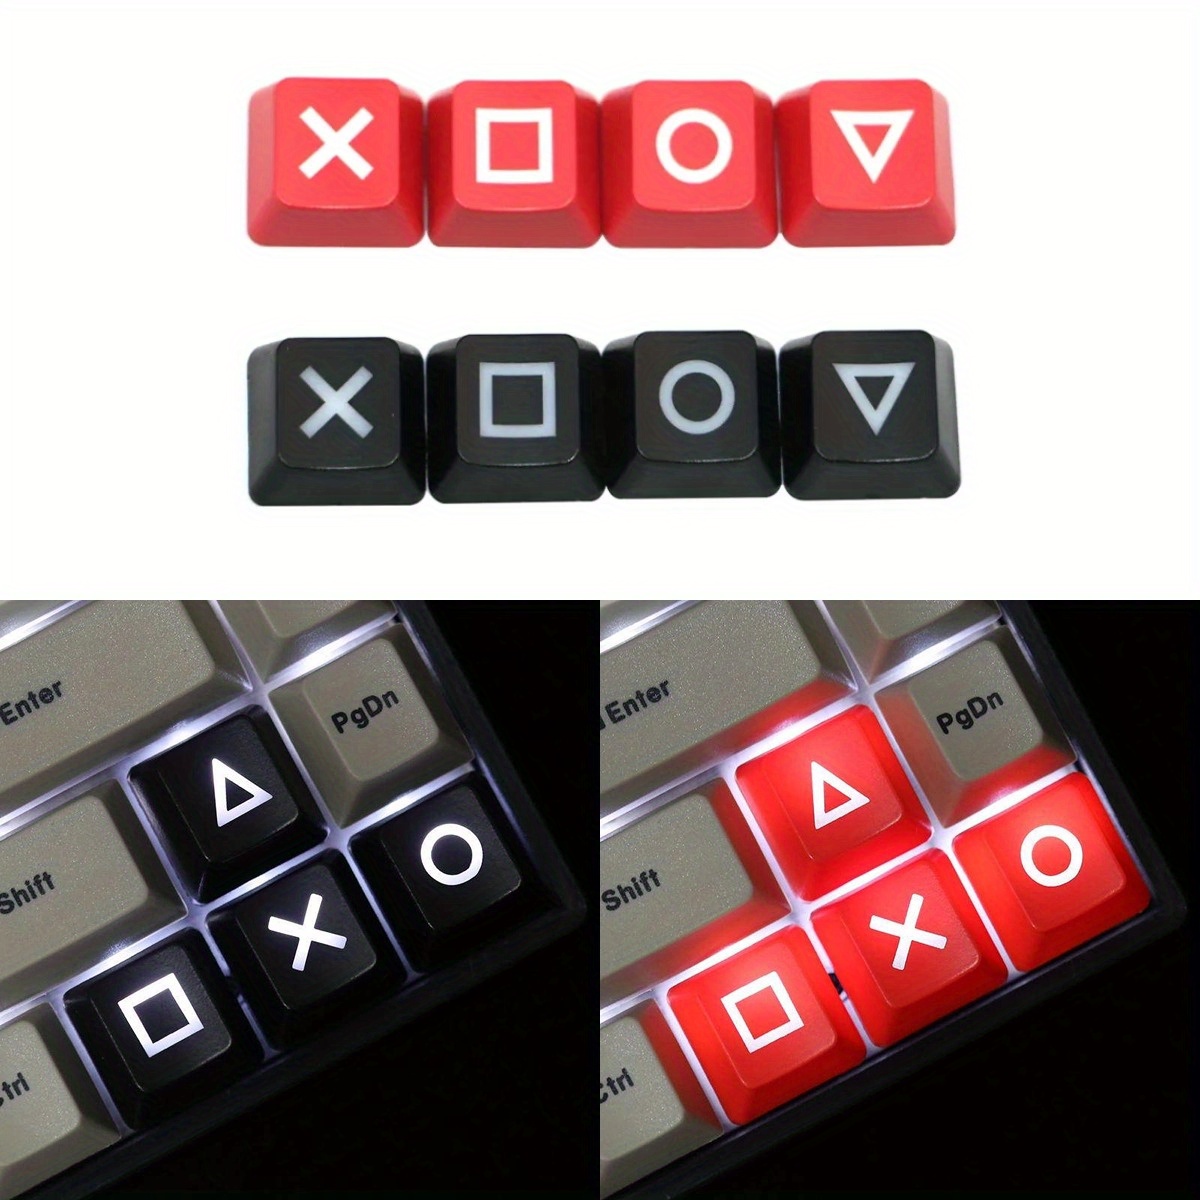 

Keyboard Keycaps Arrow/direction Key Diy Personality Keycaps Cherry Profile Abs Mx Keycap For Mx Switches Backlit Mechanical Gaming Keyboard